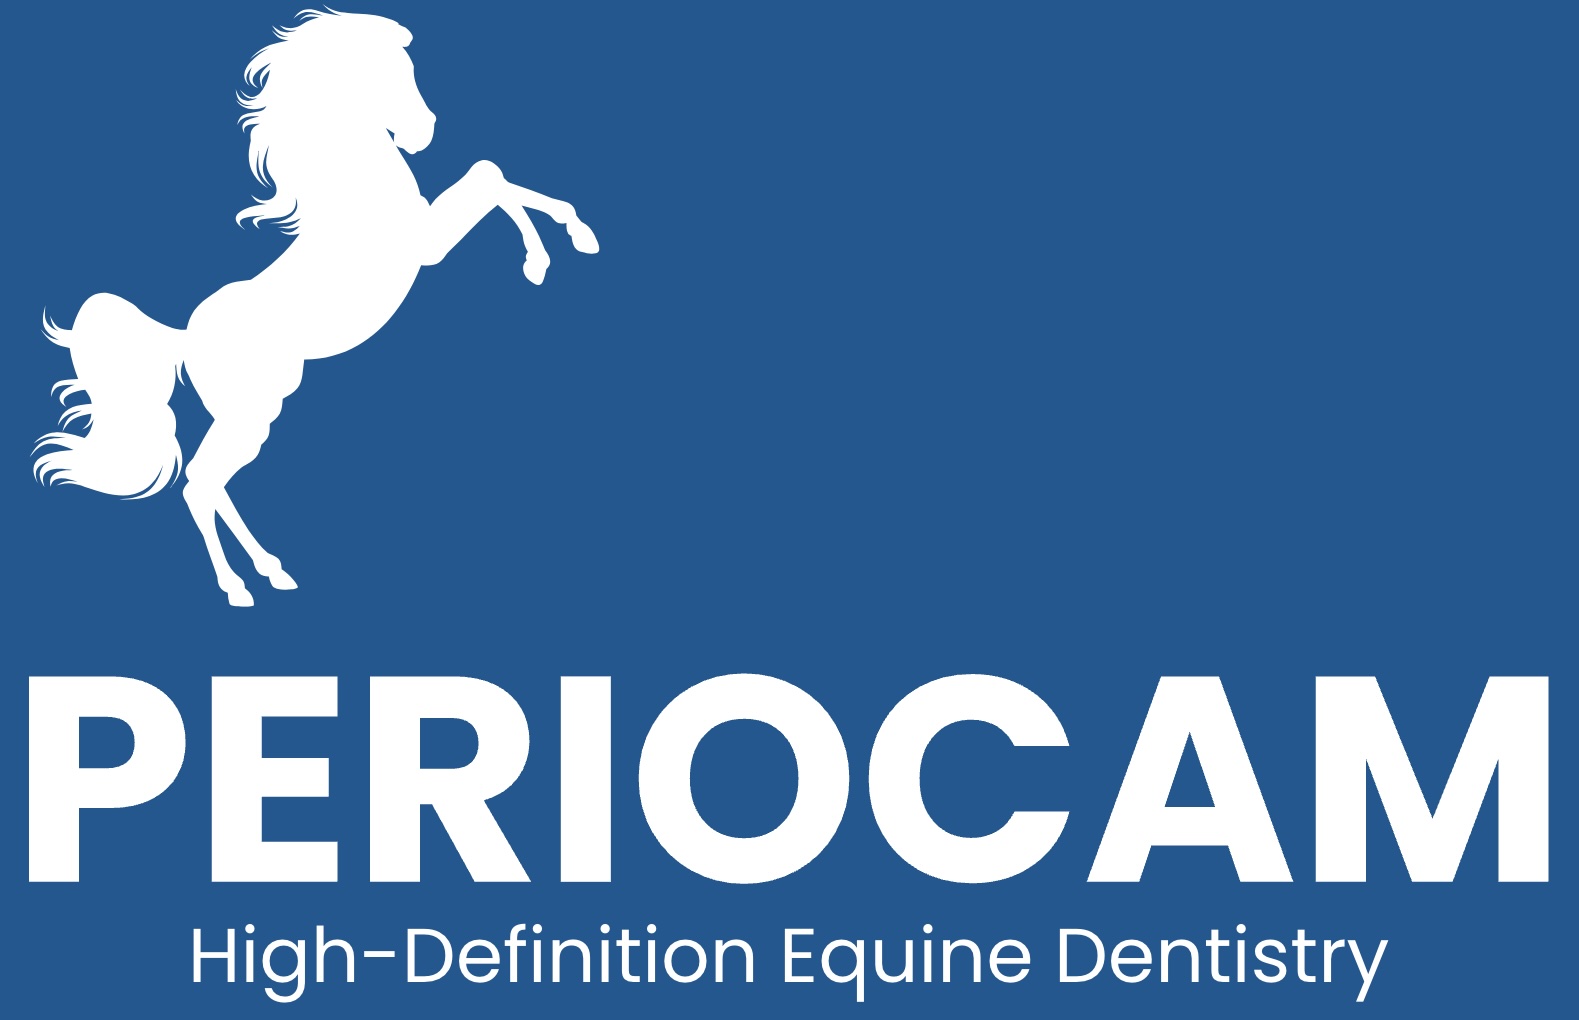 PerioCam logo with rearing horse, high-definition equine dentistry